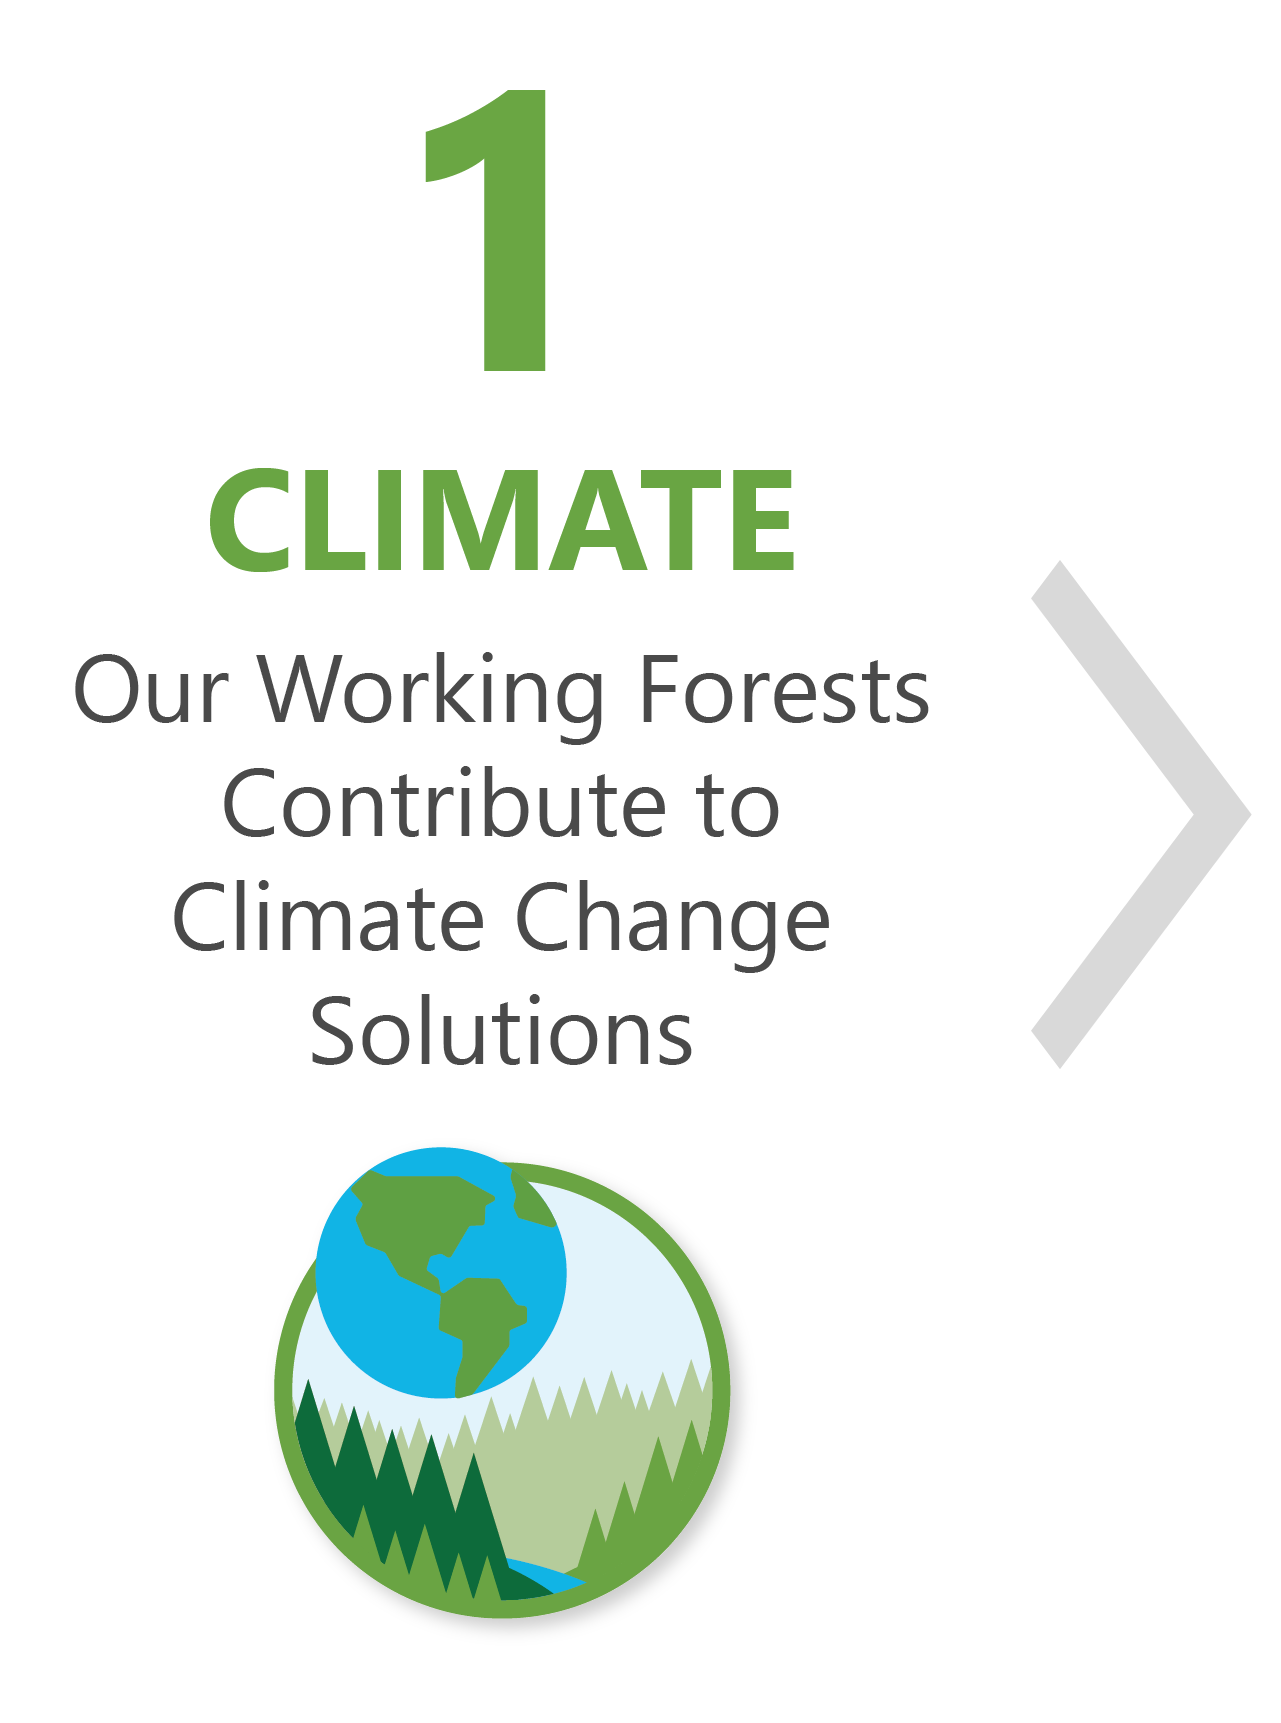 Icon and graphic for Our Working Forests Contribute to Climate Change Solutions, showing a globe overlaid over graphic of forests.